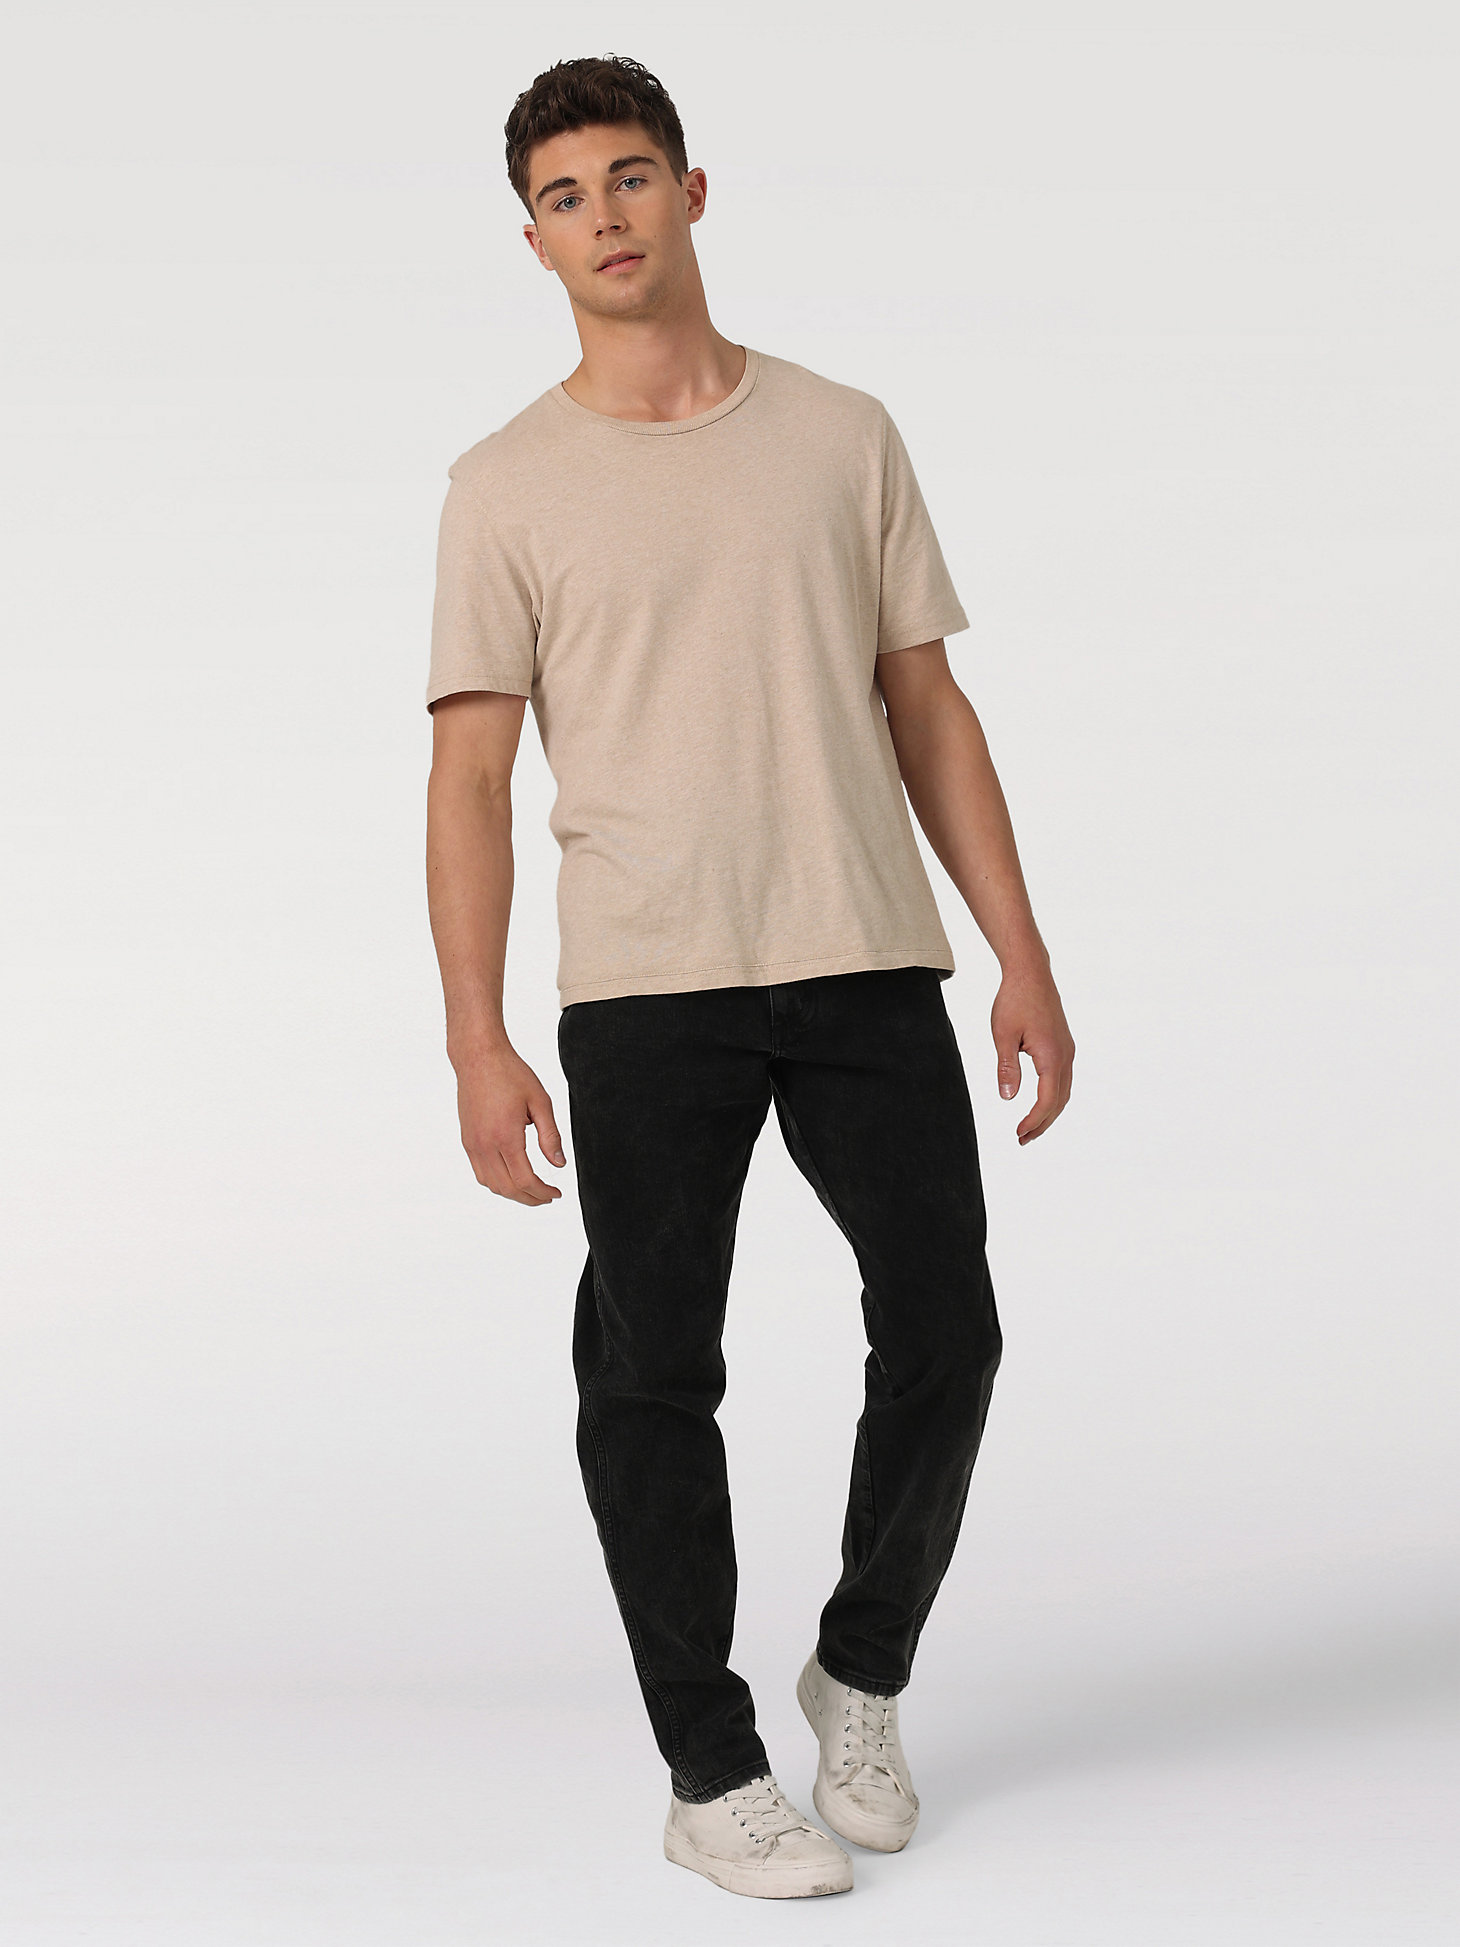 Men's Relaxed Taper Jean in Frosted Black alternative view 6